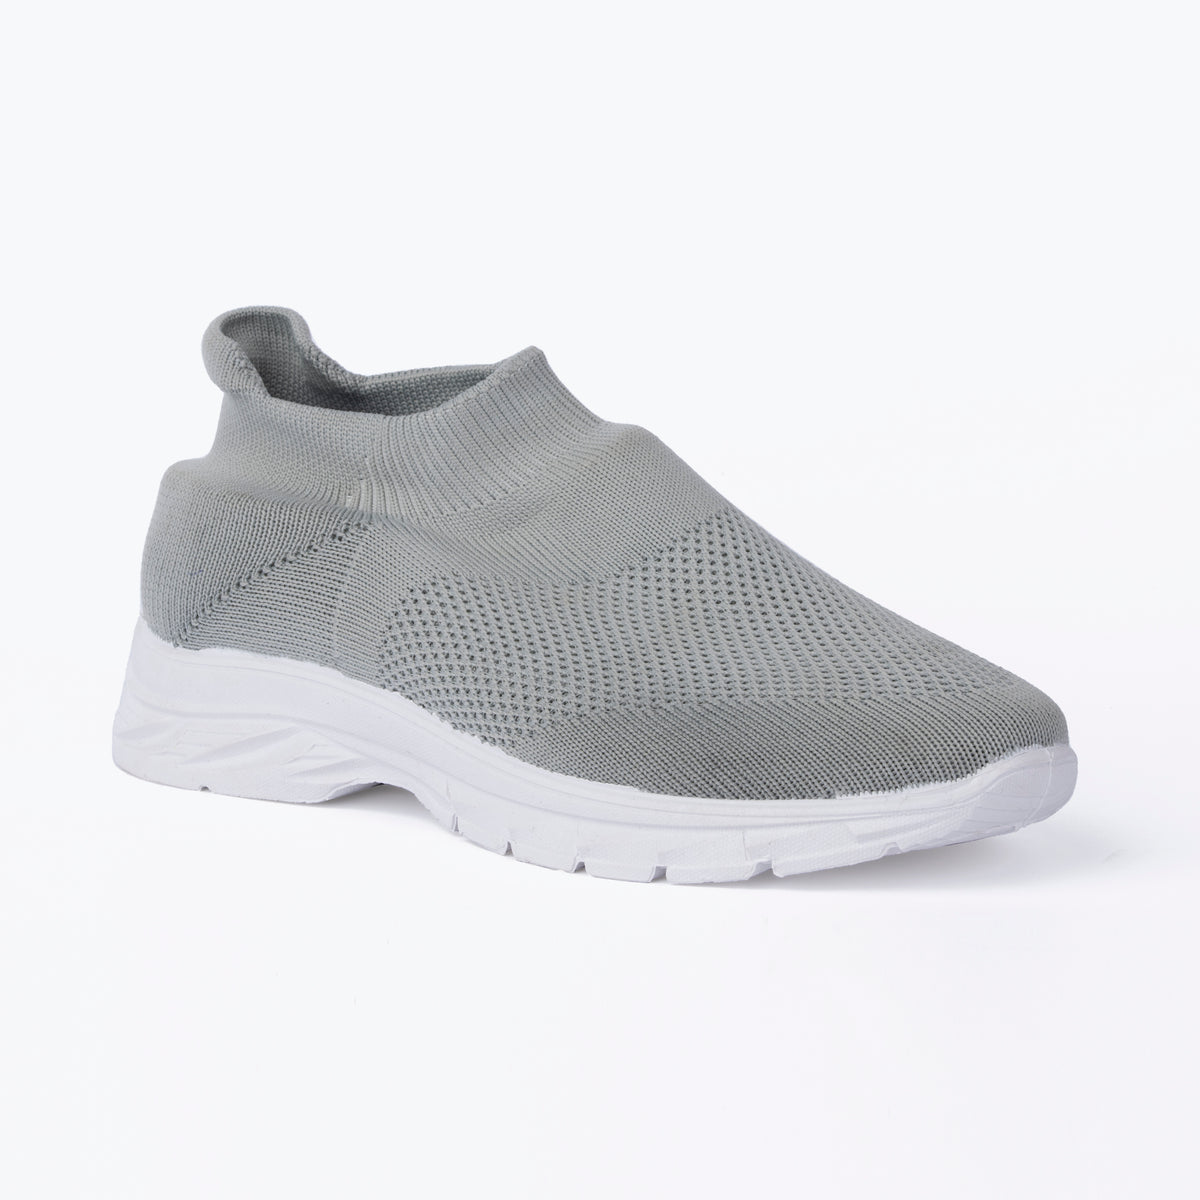 YOO LIGHT GRAY CASUAL KNITTED SHOES FOR LADIES - ABAYA – Yoo Brands Pvt Ltd